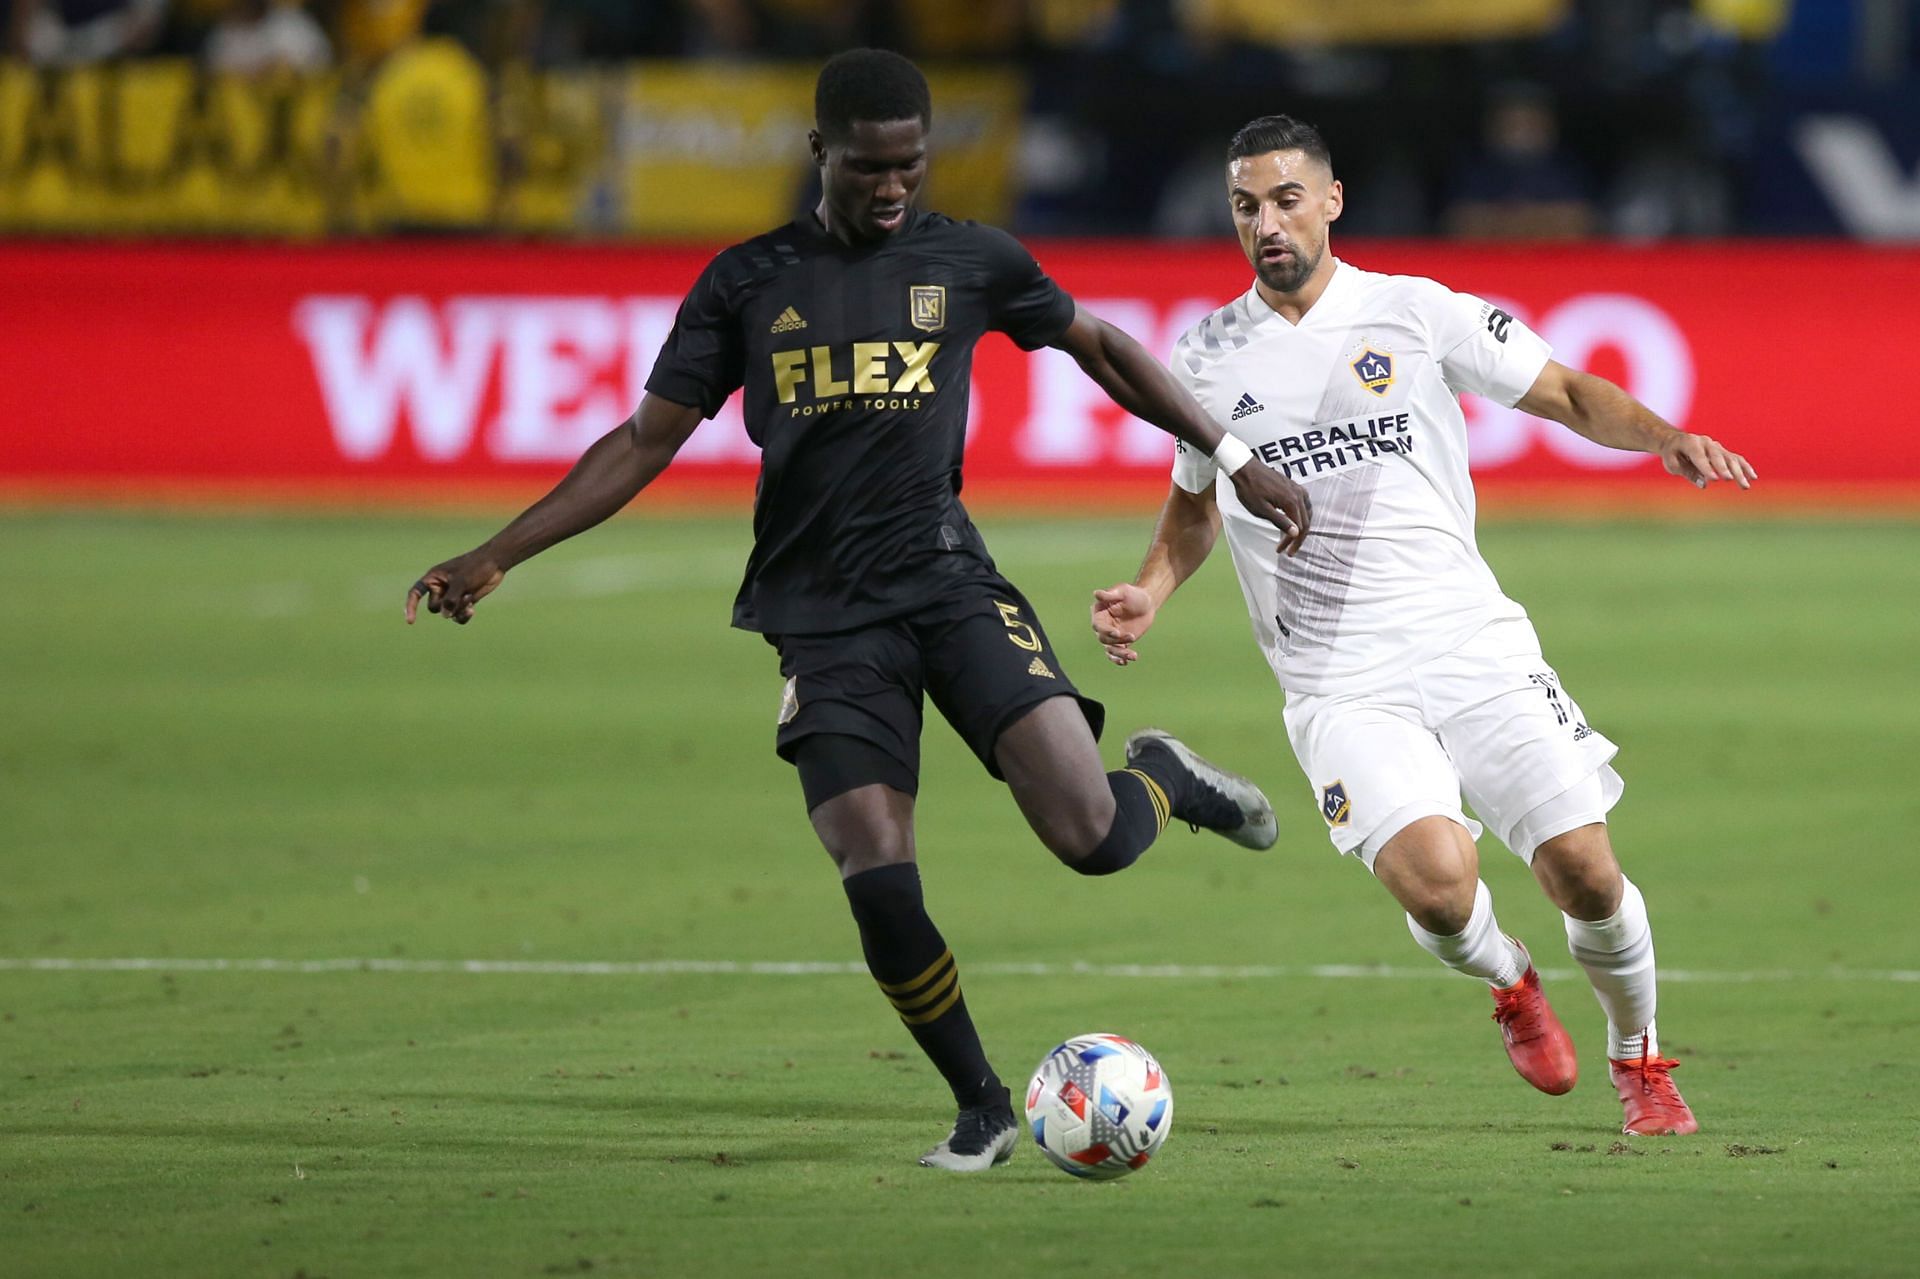 Los Angeles Galaxy have a point to prove